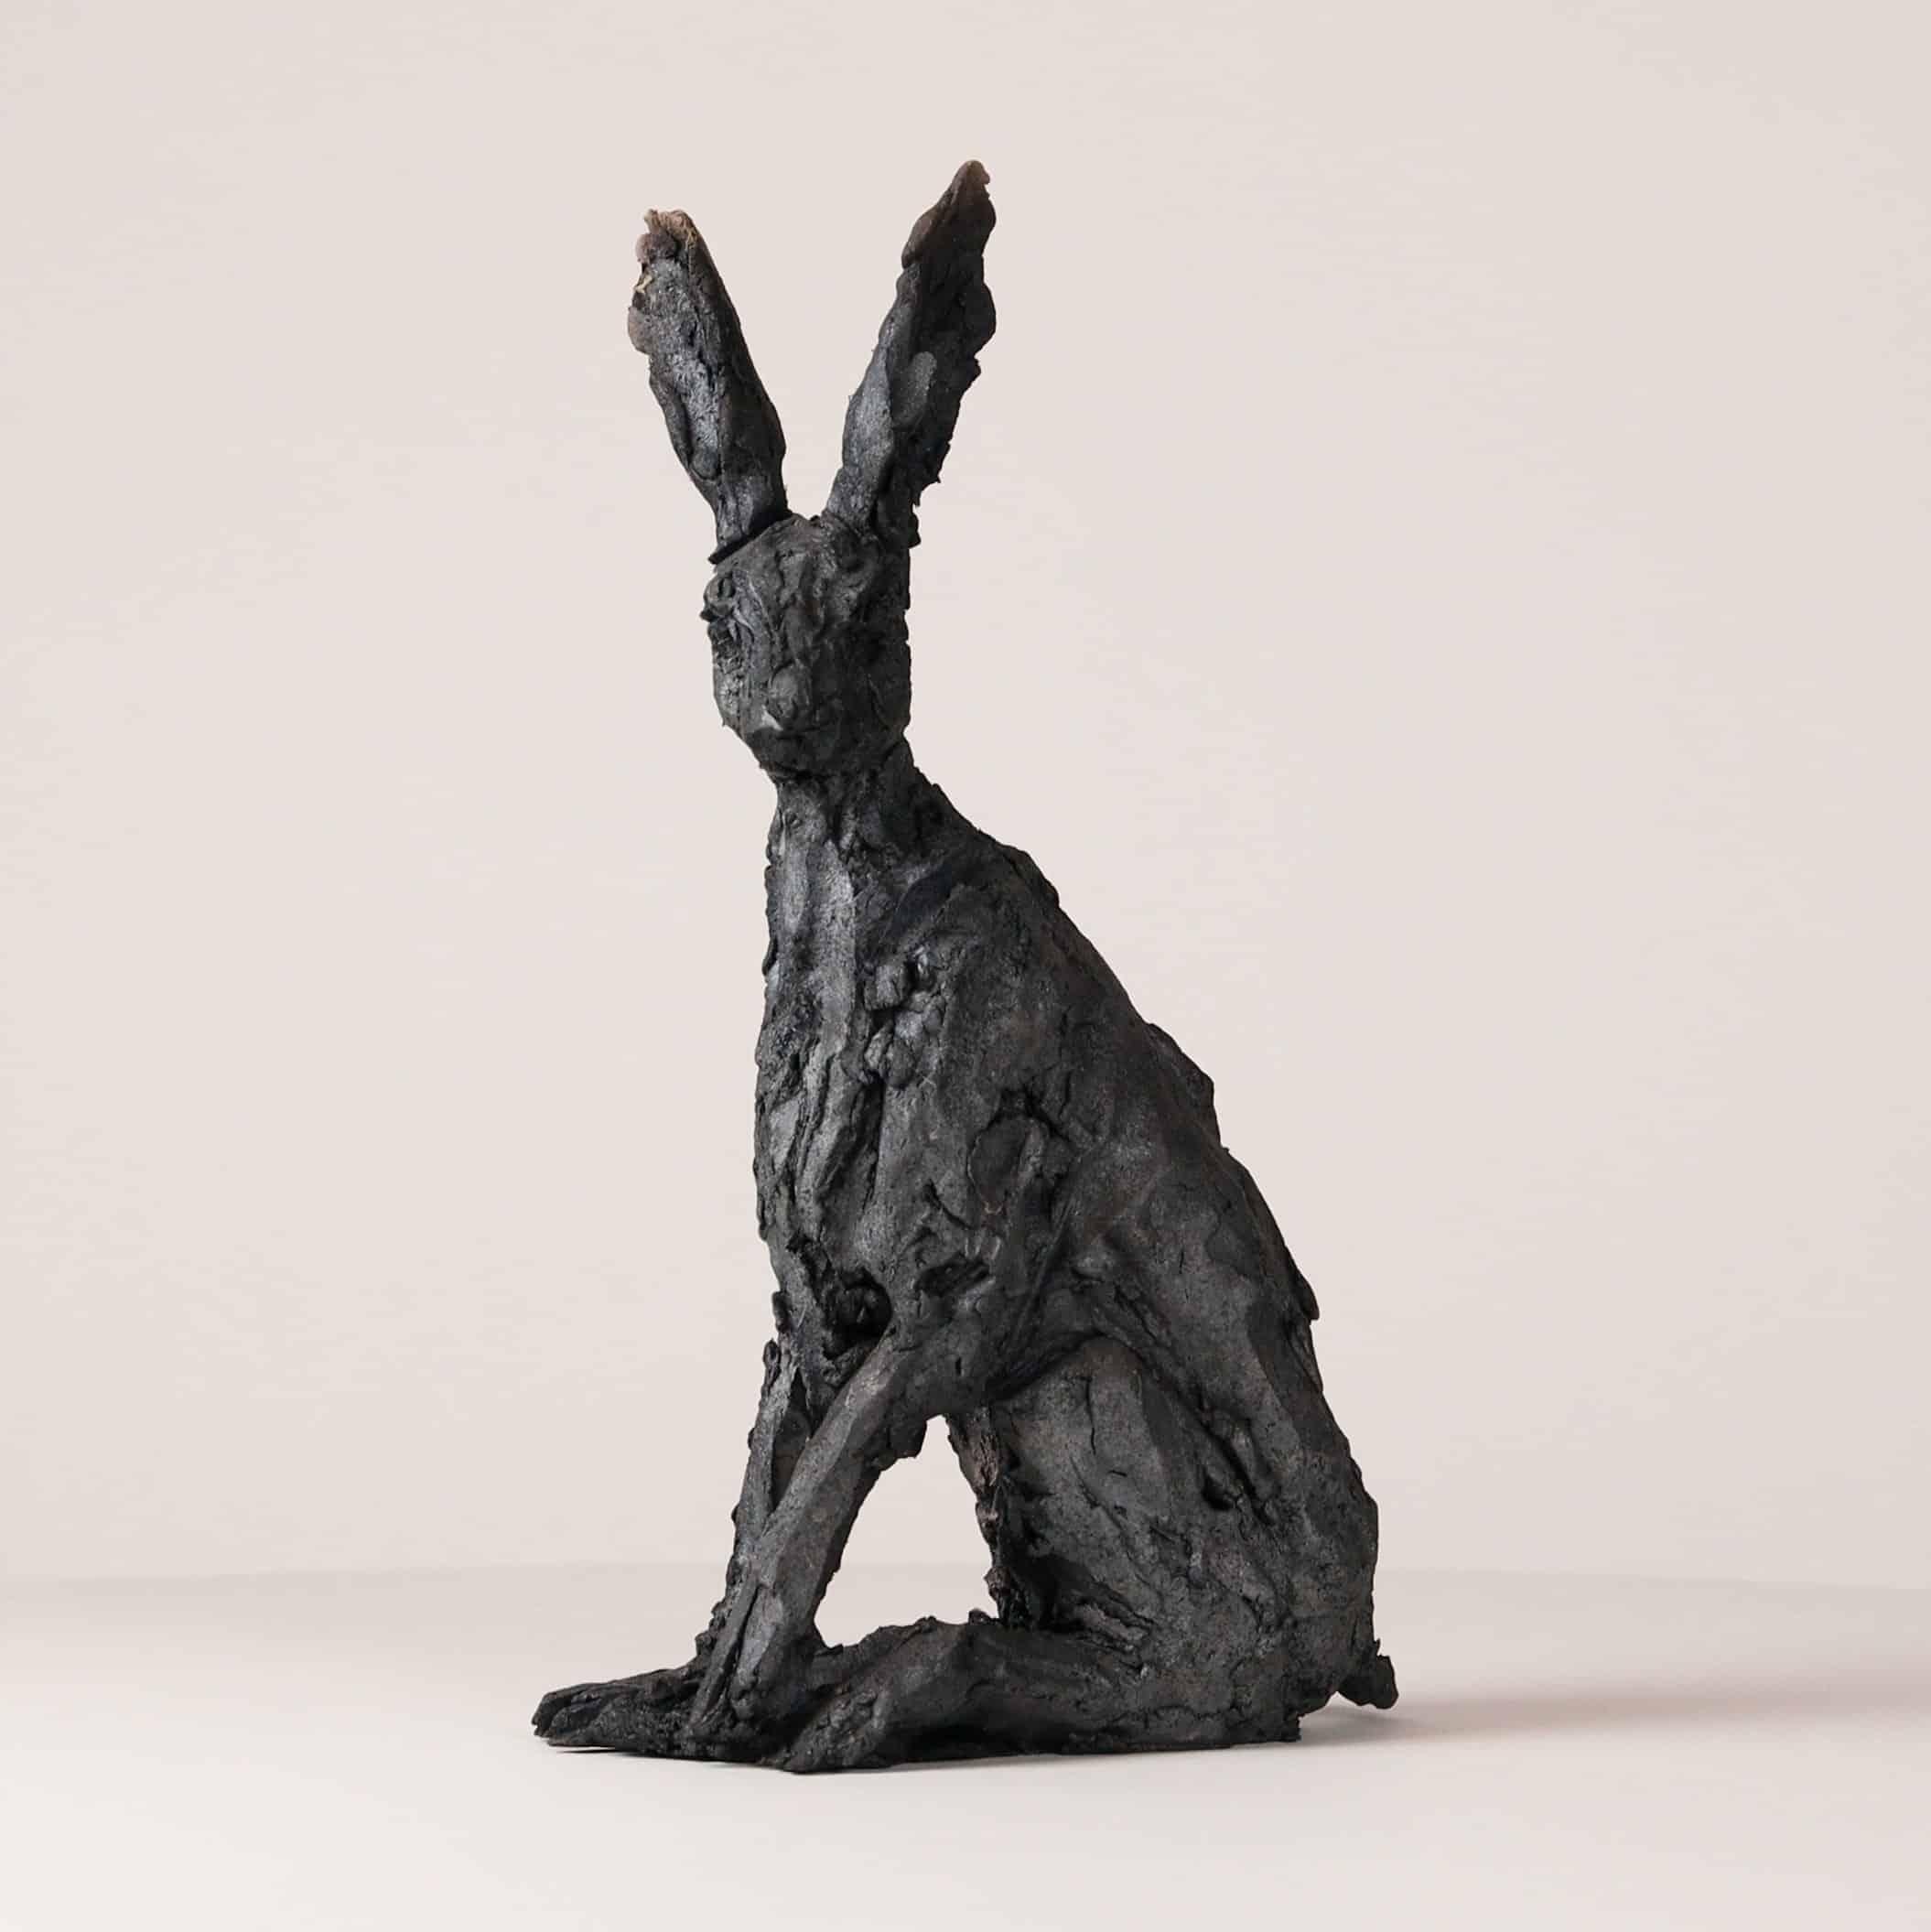 Seated hare is a unique smoke-fired sandstone sculpture by French contemporary artist Cécile Raynal, dimensions are 32.5 × 20 × 10 cm (12.8 × 7.9 × 3.9 in). 

This artwork depicts a watchful and active hare. However, the observer can see right away